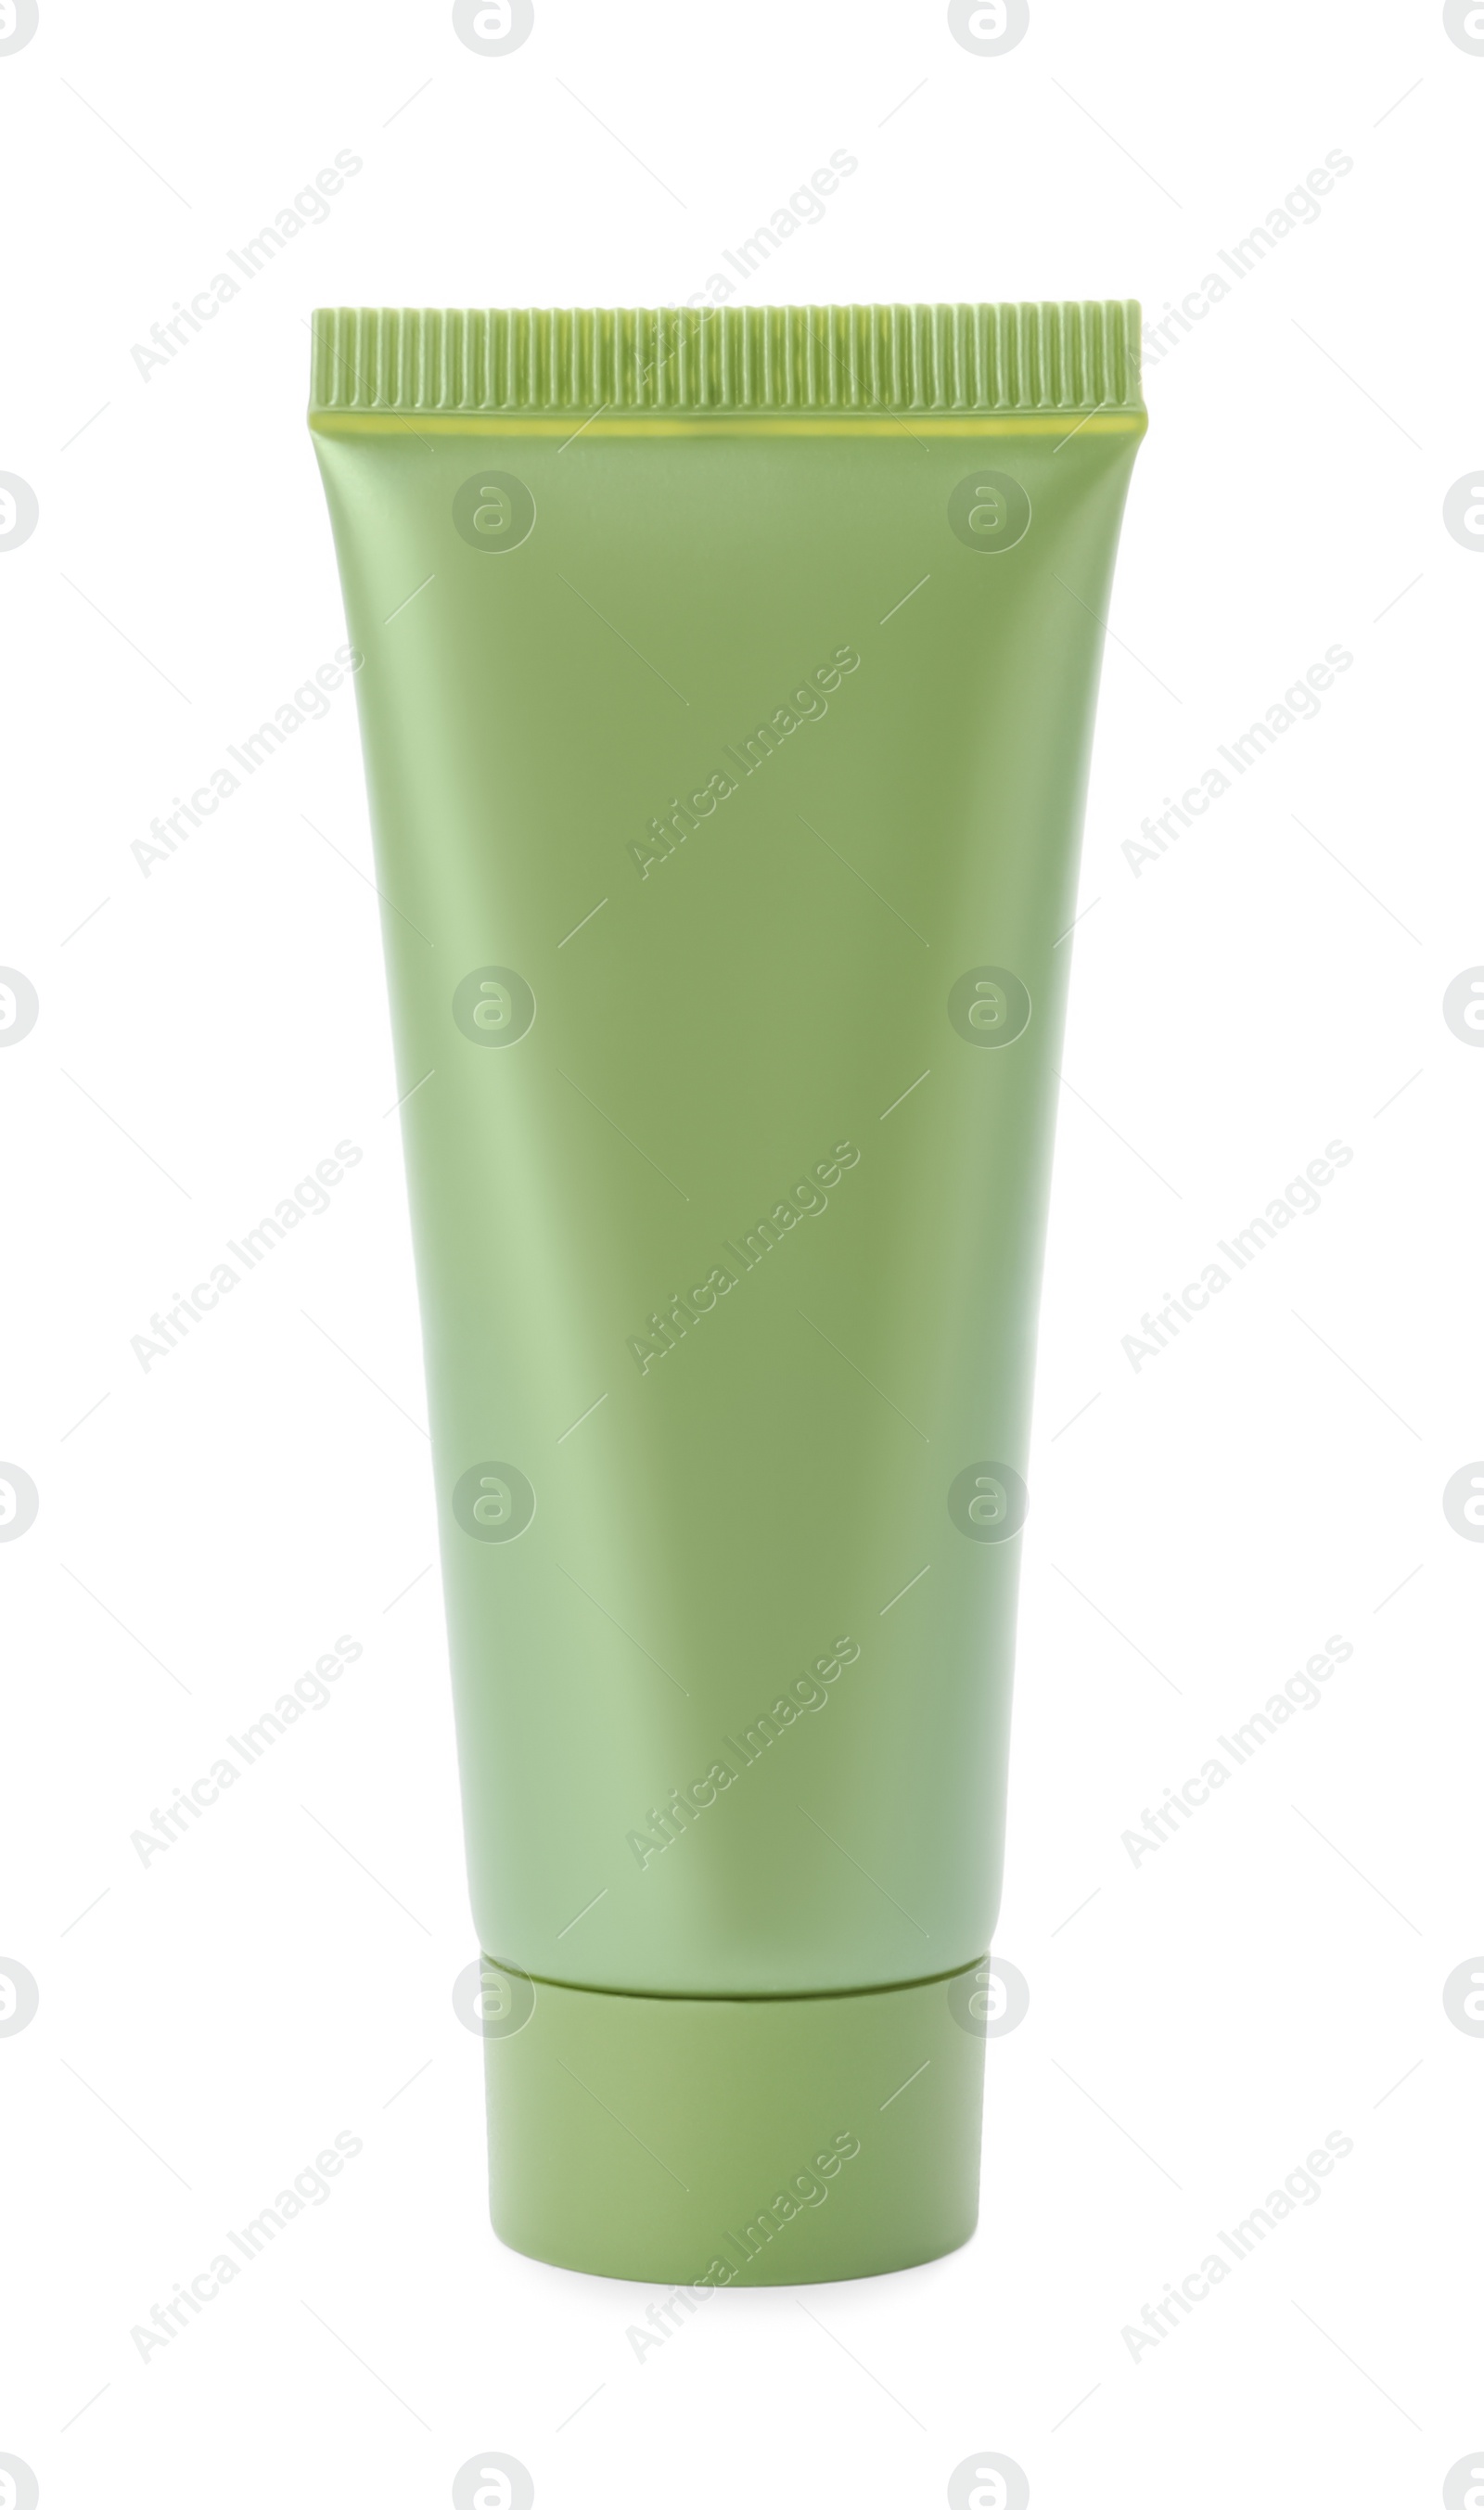 Photo of Tube of cosmetic product isolated on white